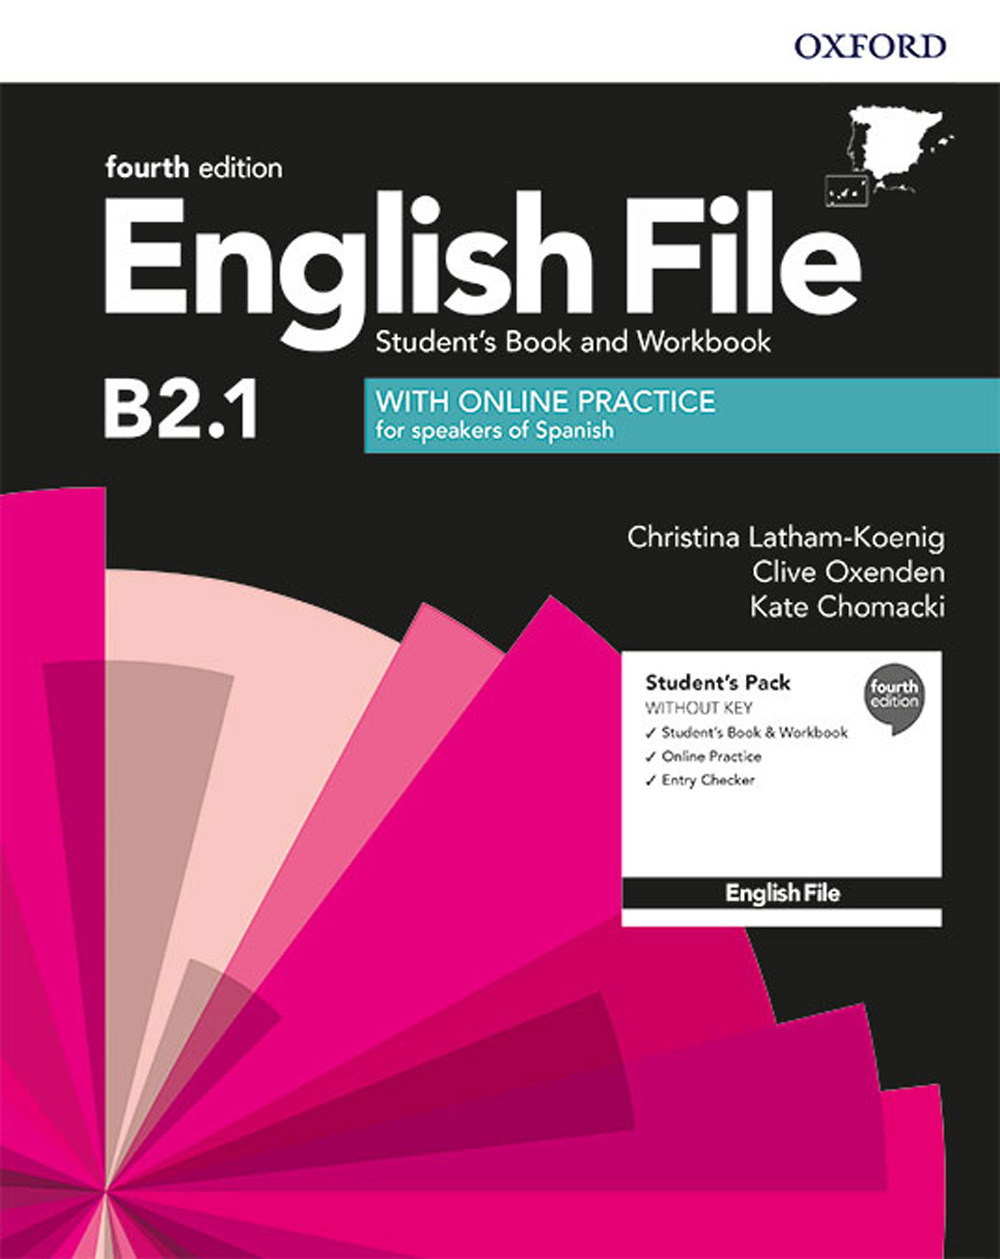 English file 4th edition students book. English file 4 Edition. English file 4th Edition. English file Intermediate 4th Edition. Intermediate Workbook ответы fourth Edition.